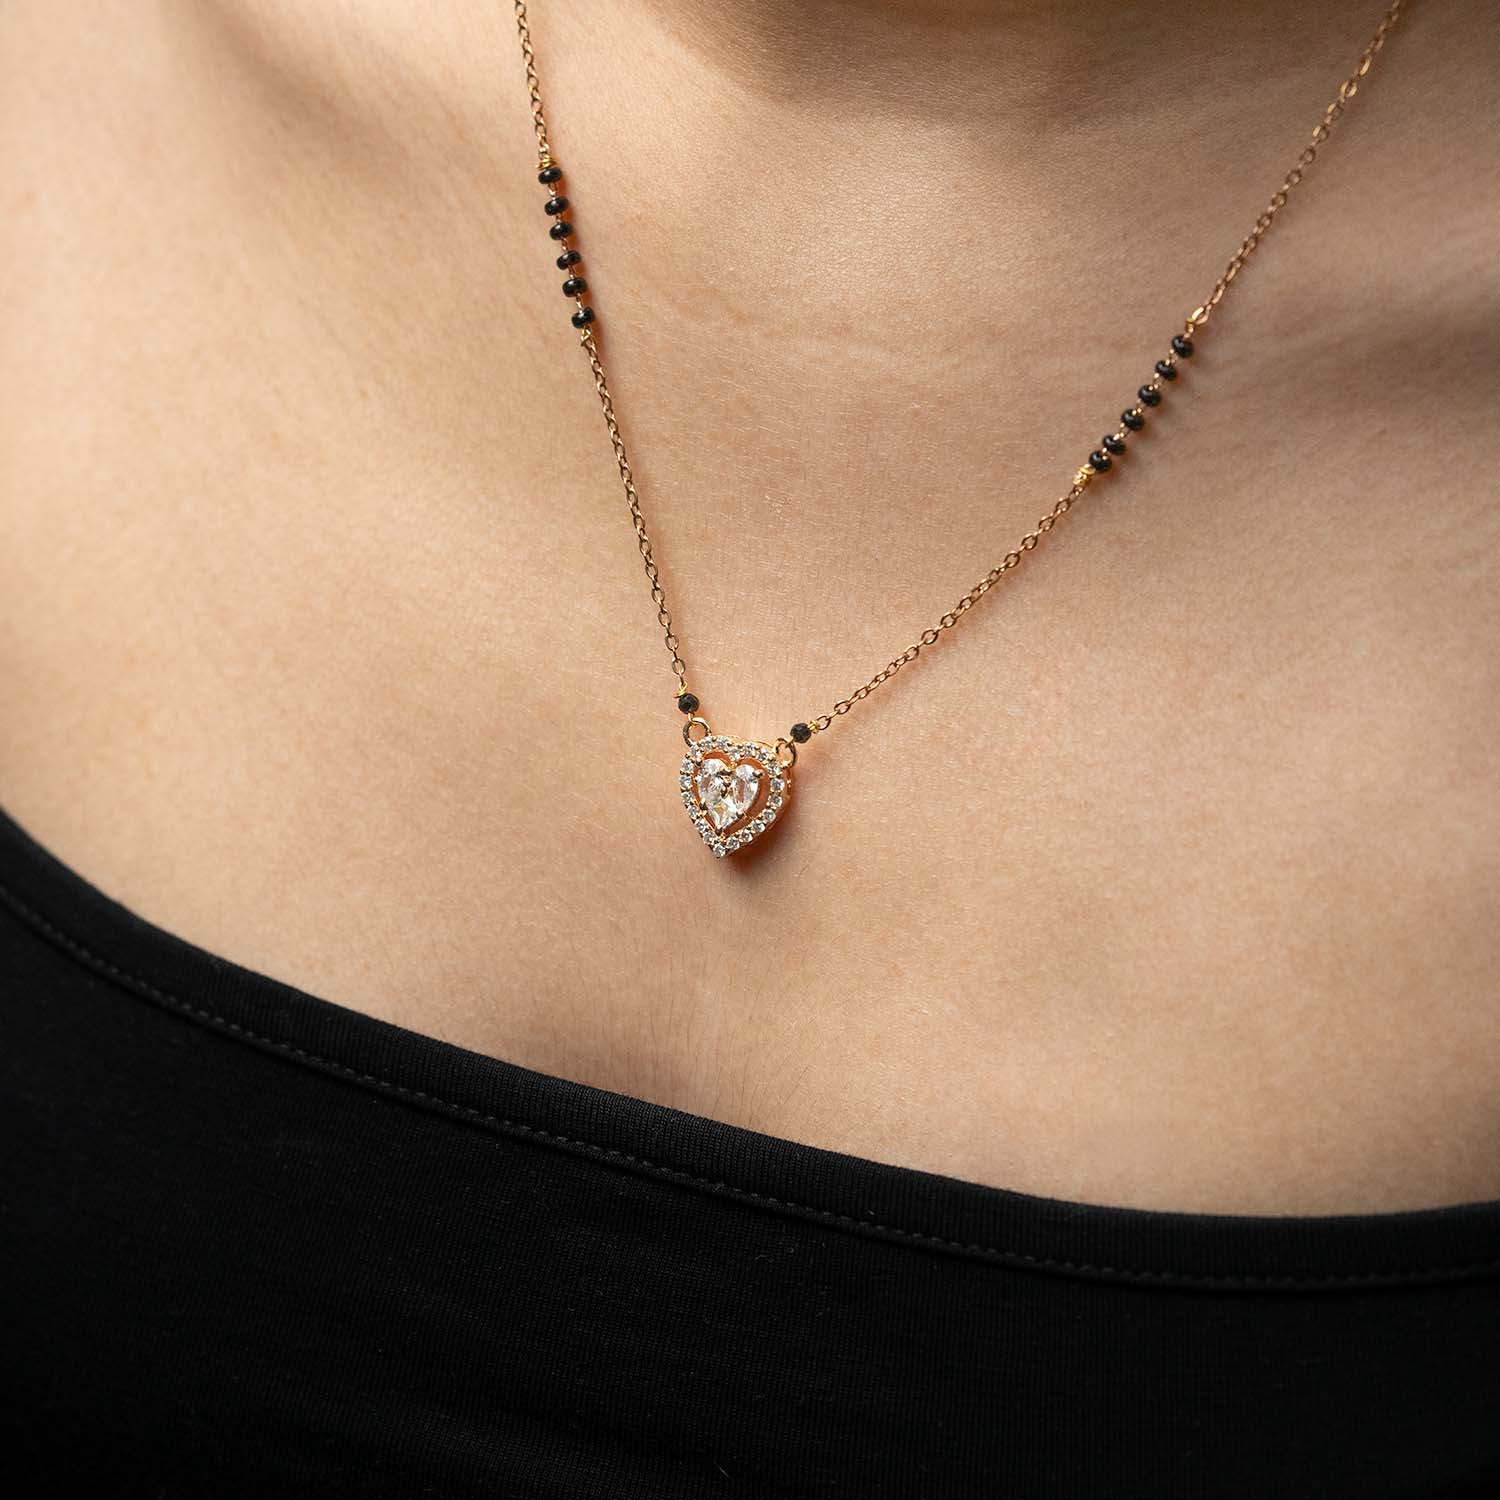 Rose Gold Magnetic Clover Heart Necklace - Mesmerize India